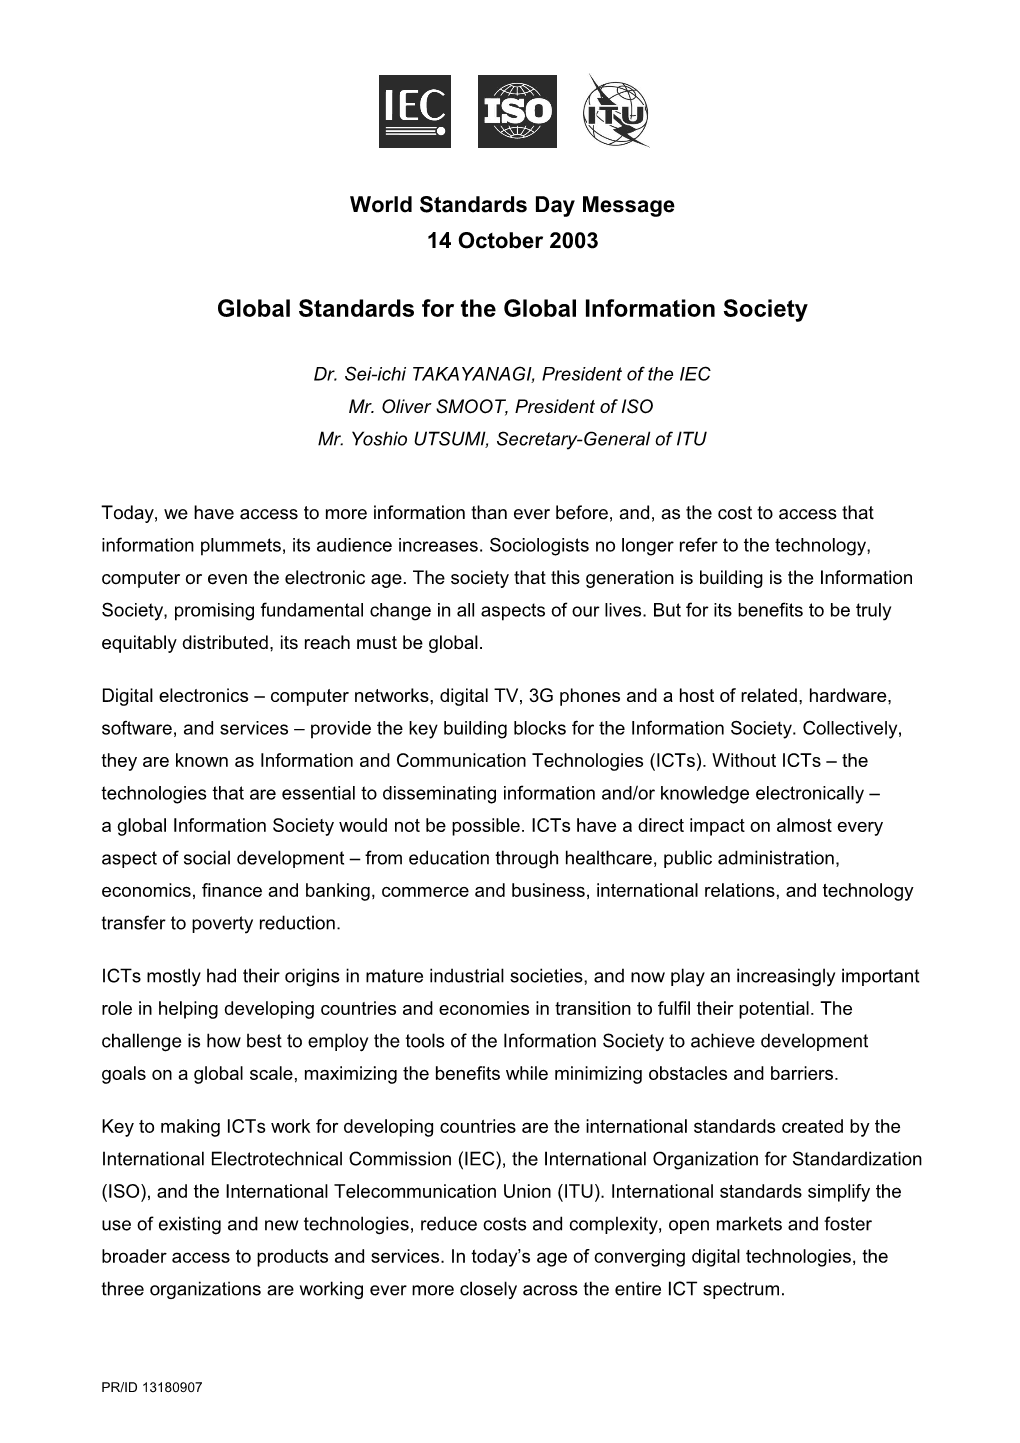 World Standards Day Message: Global Standards for the Global Information Society